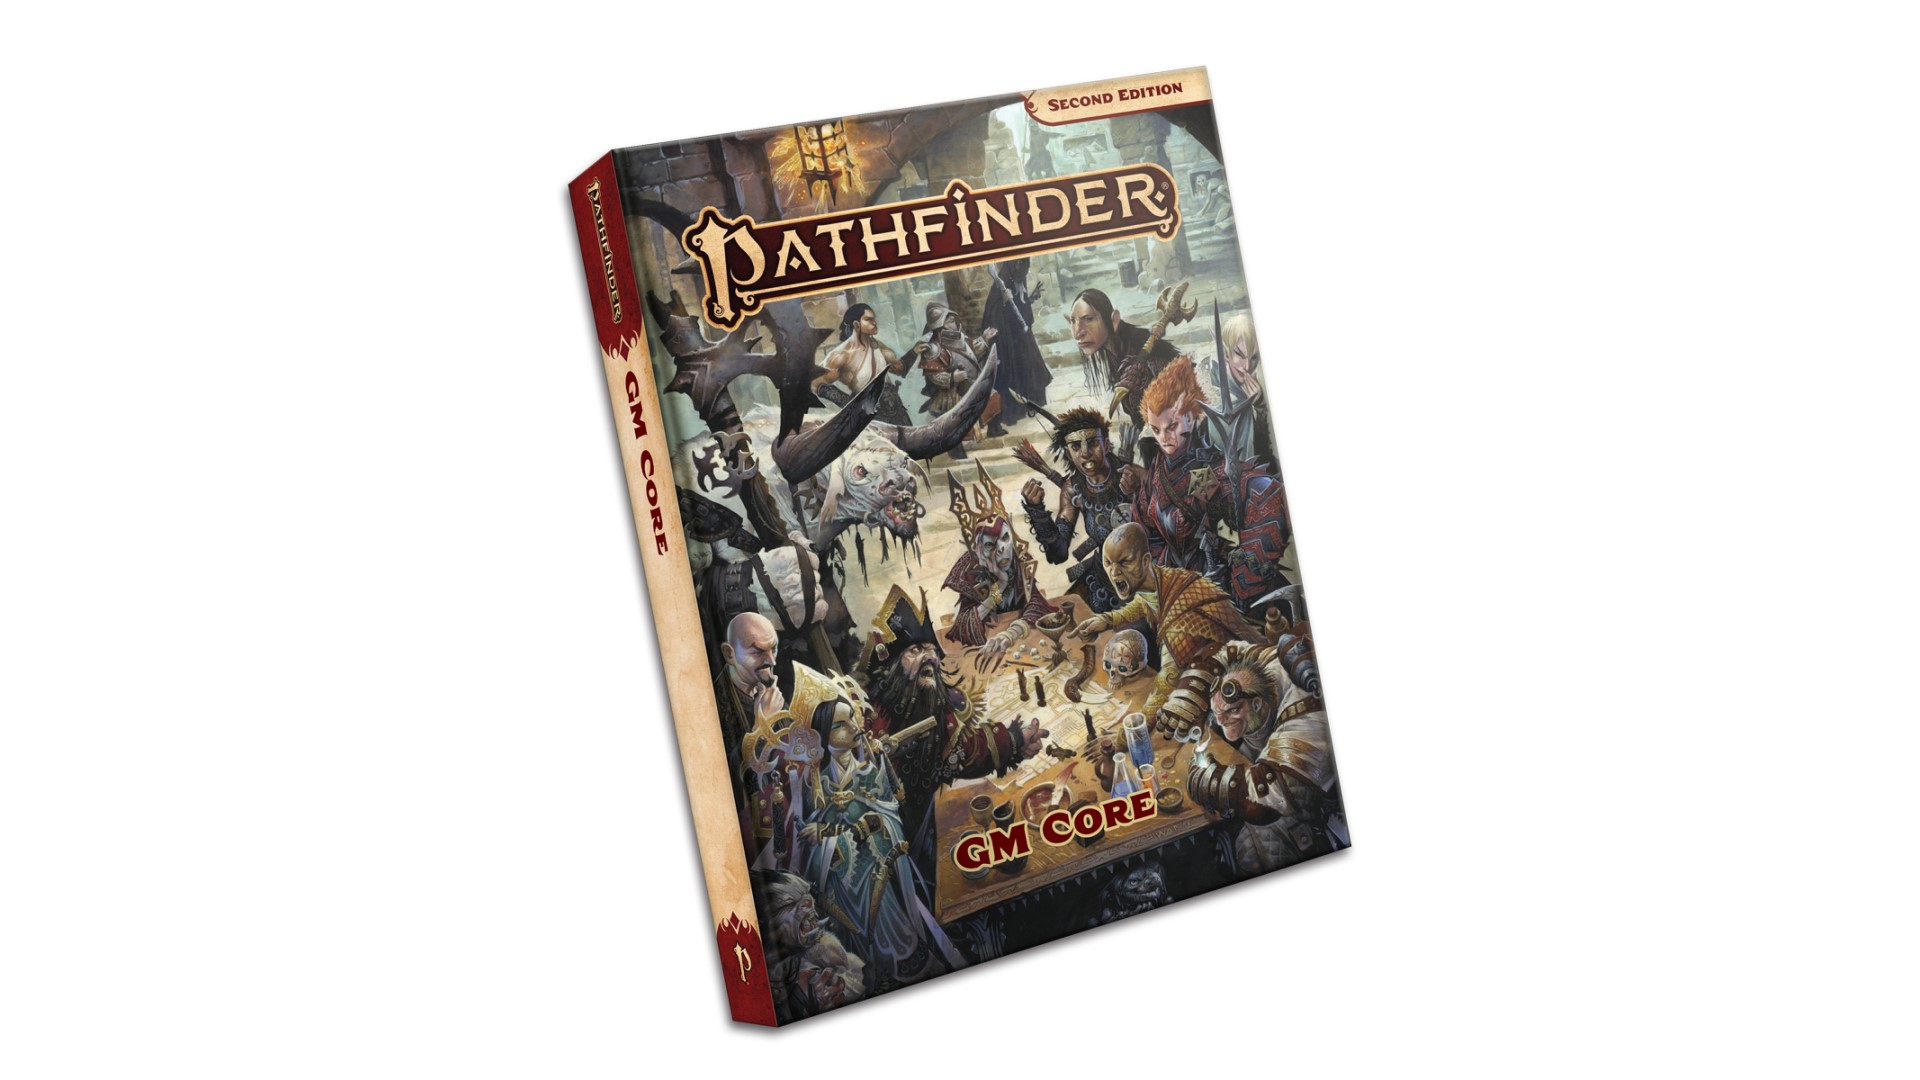 Get Your Pathfinder Books for Just $1 in this Huge RPG Humble Bundle!